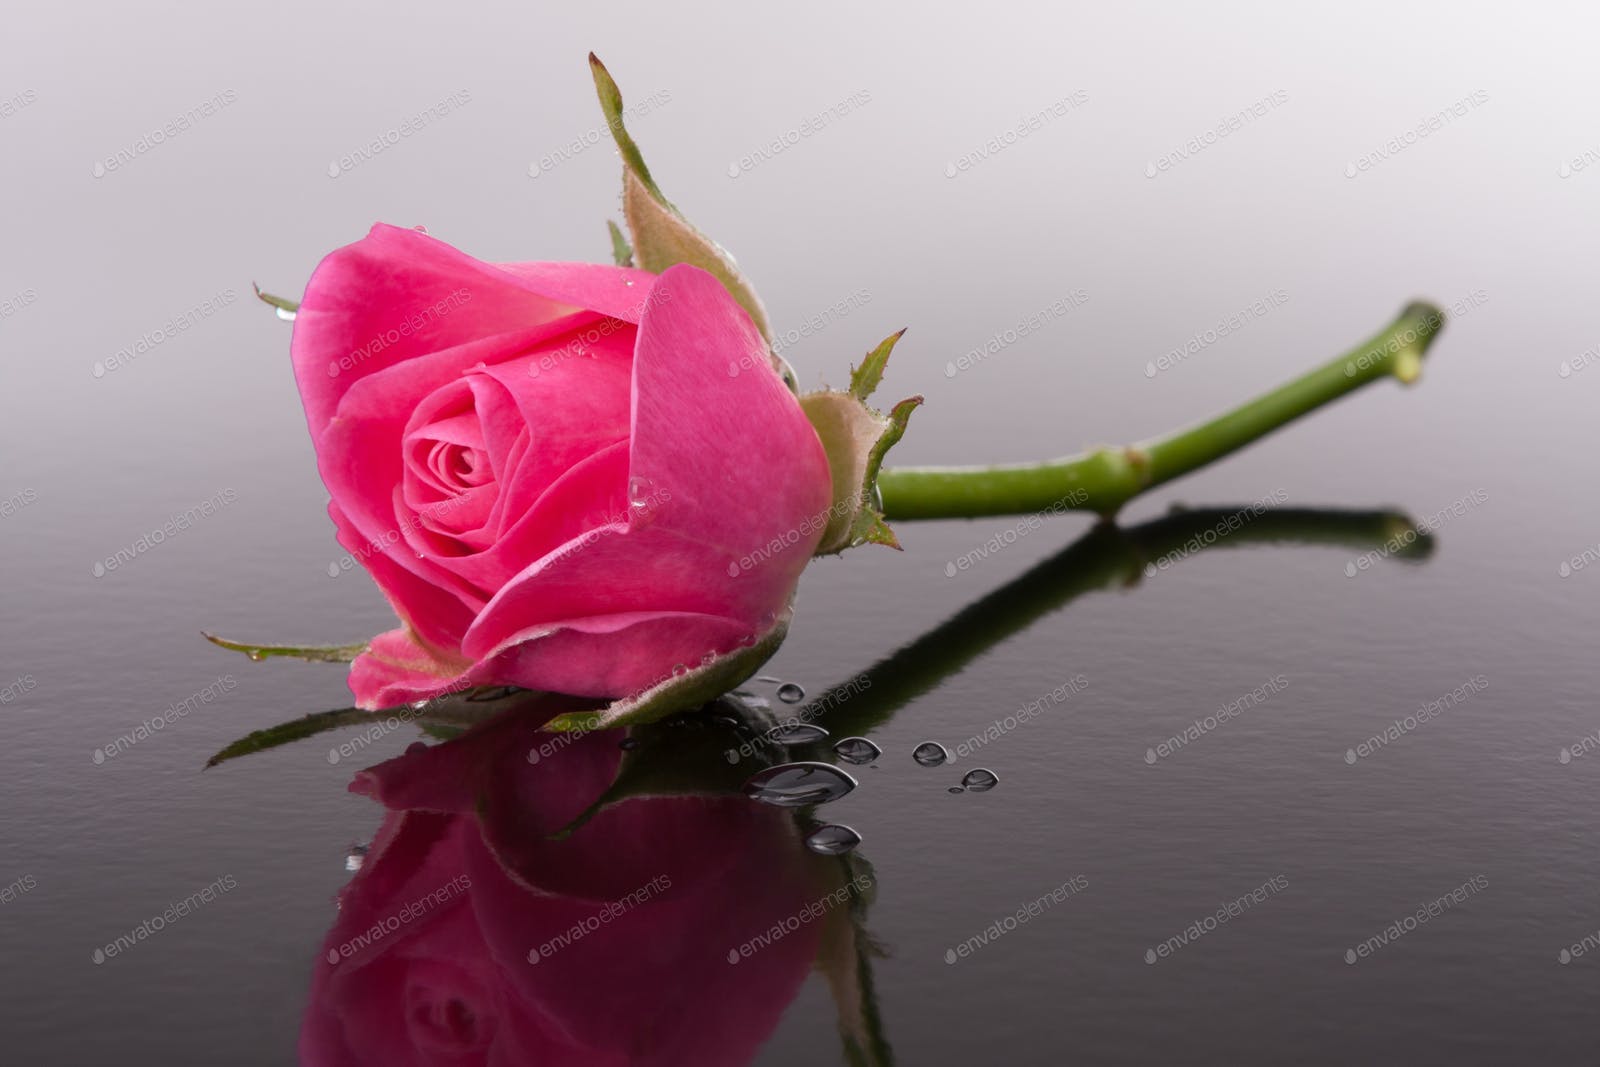 rose flower with reflection on dark surface still life photo by natika on Envato Elements